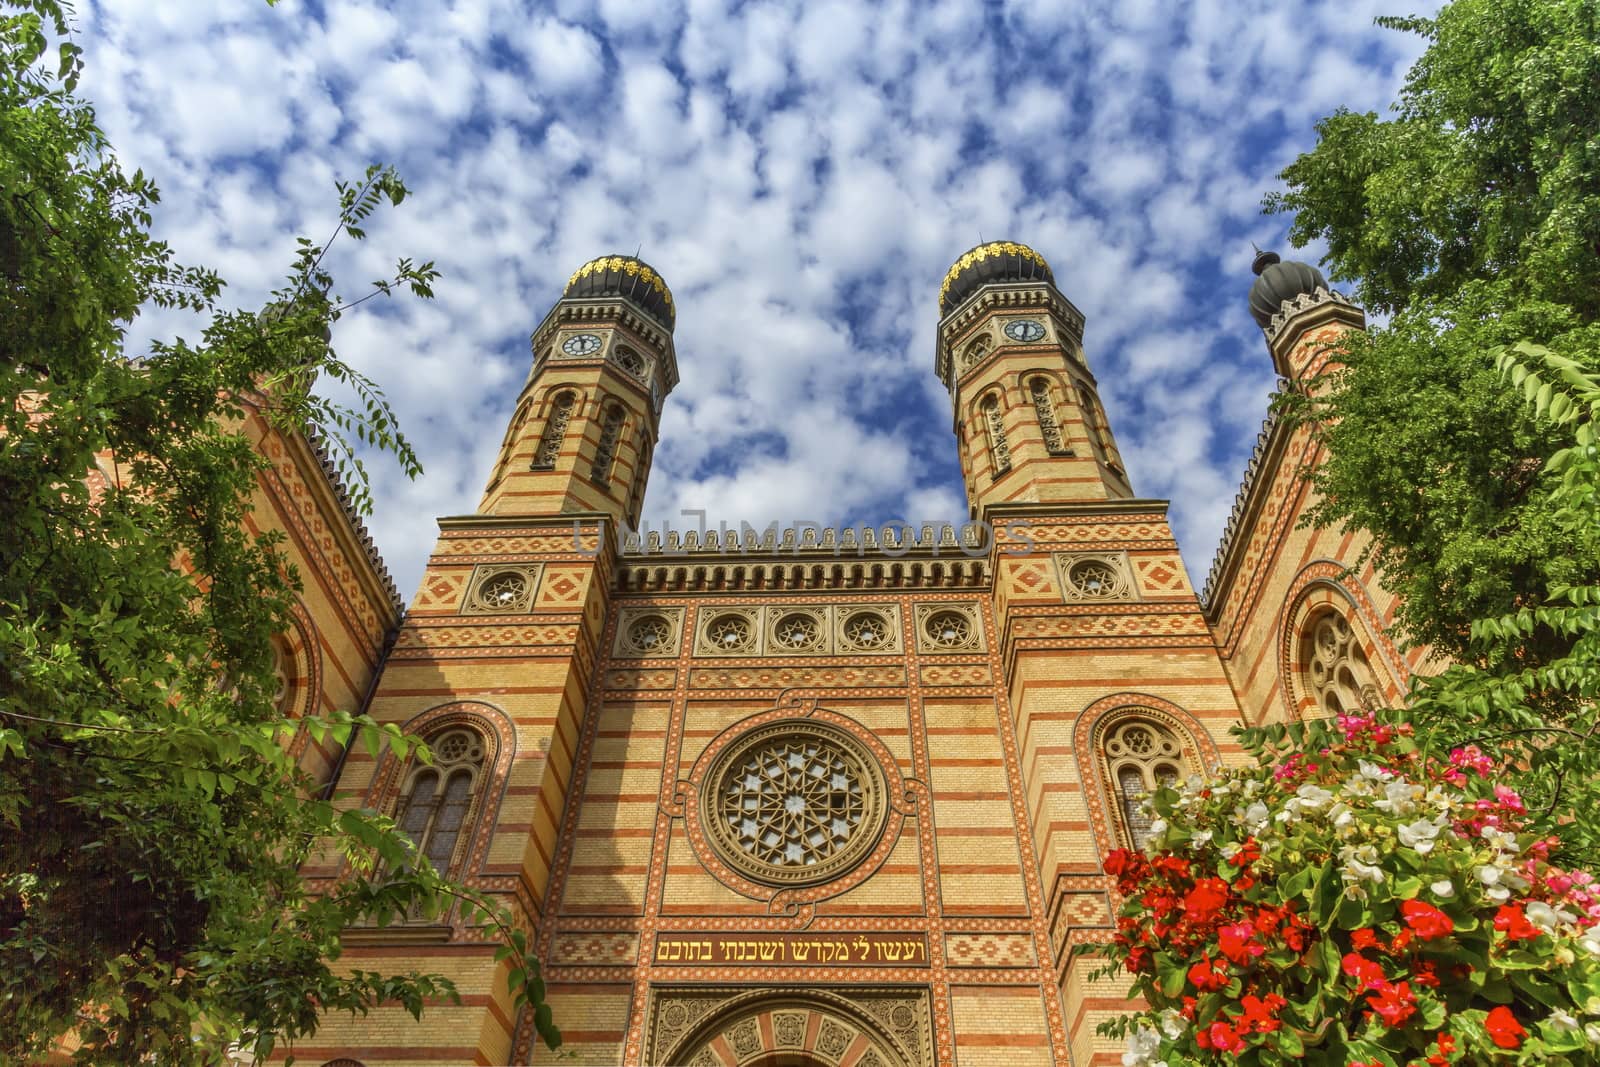 Dohany street synagogue, the great synagogue or tabakgasse synagogue, Budapest, Hungary by Elenaphotos21